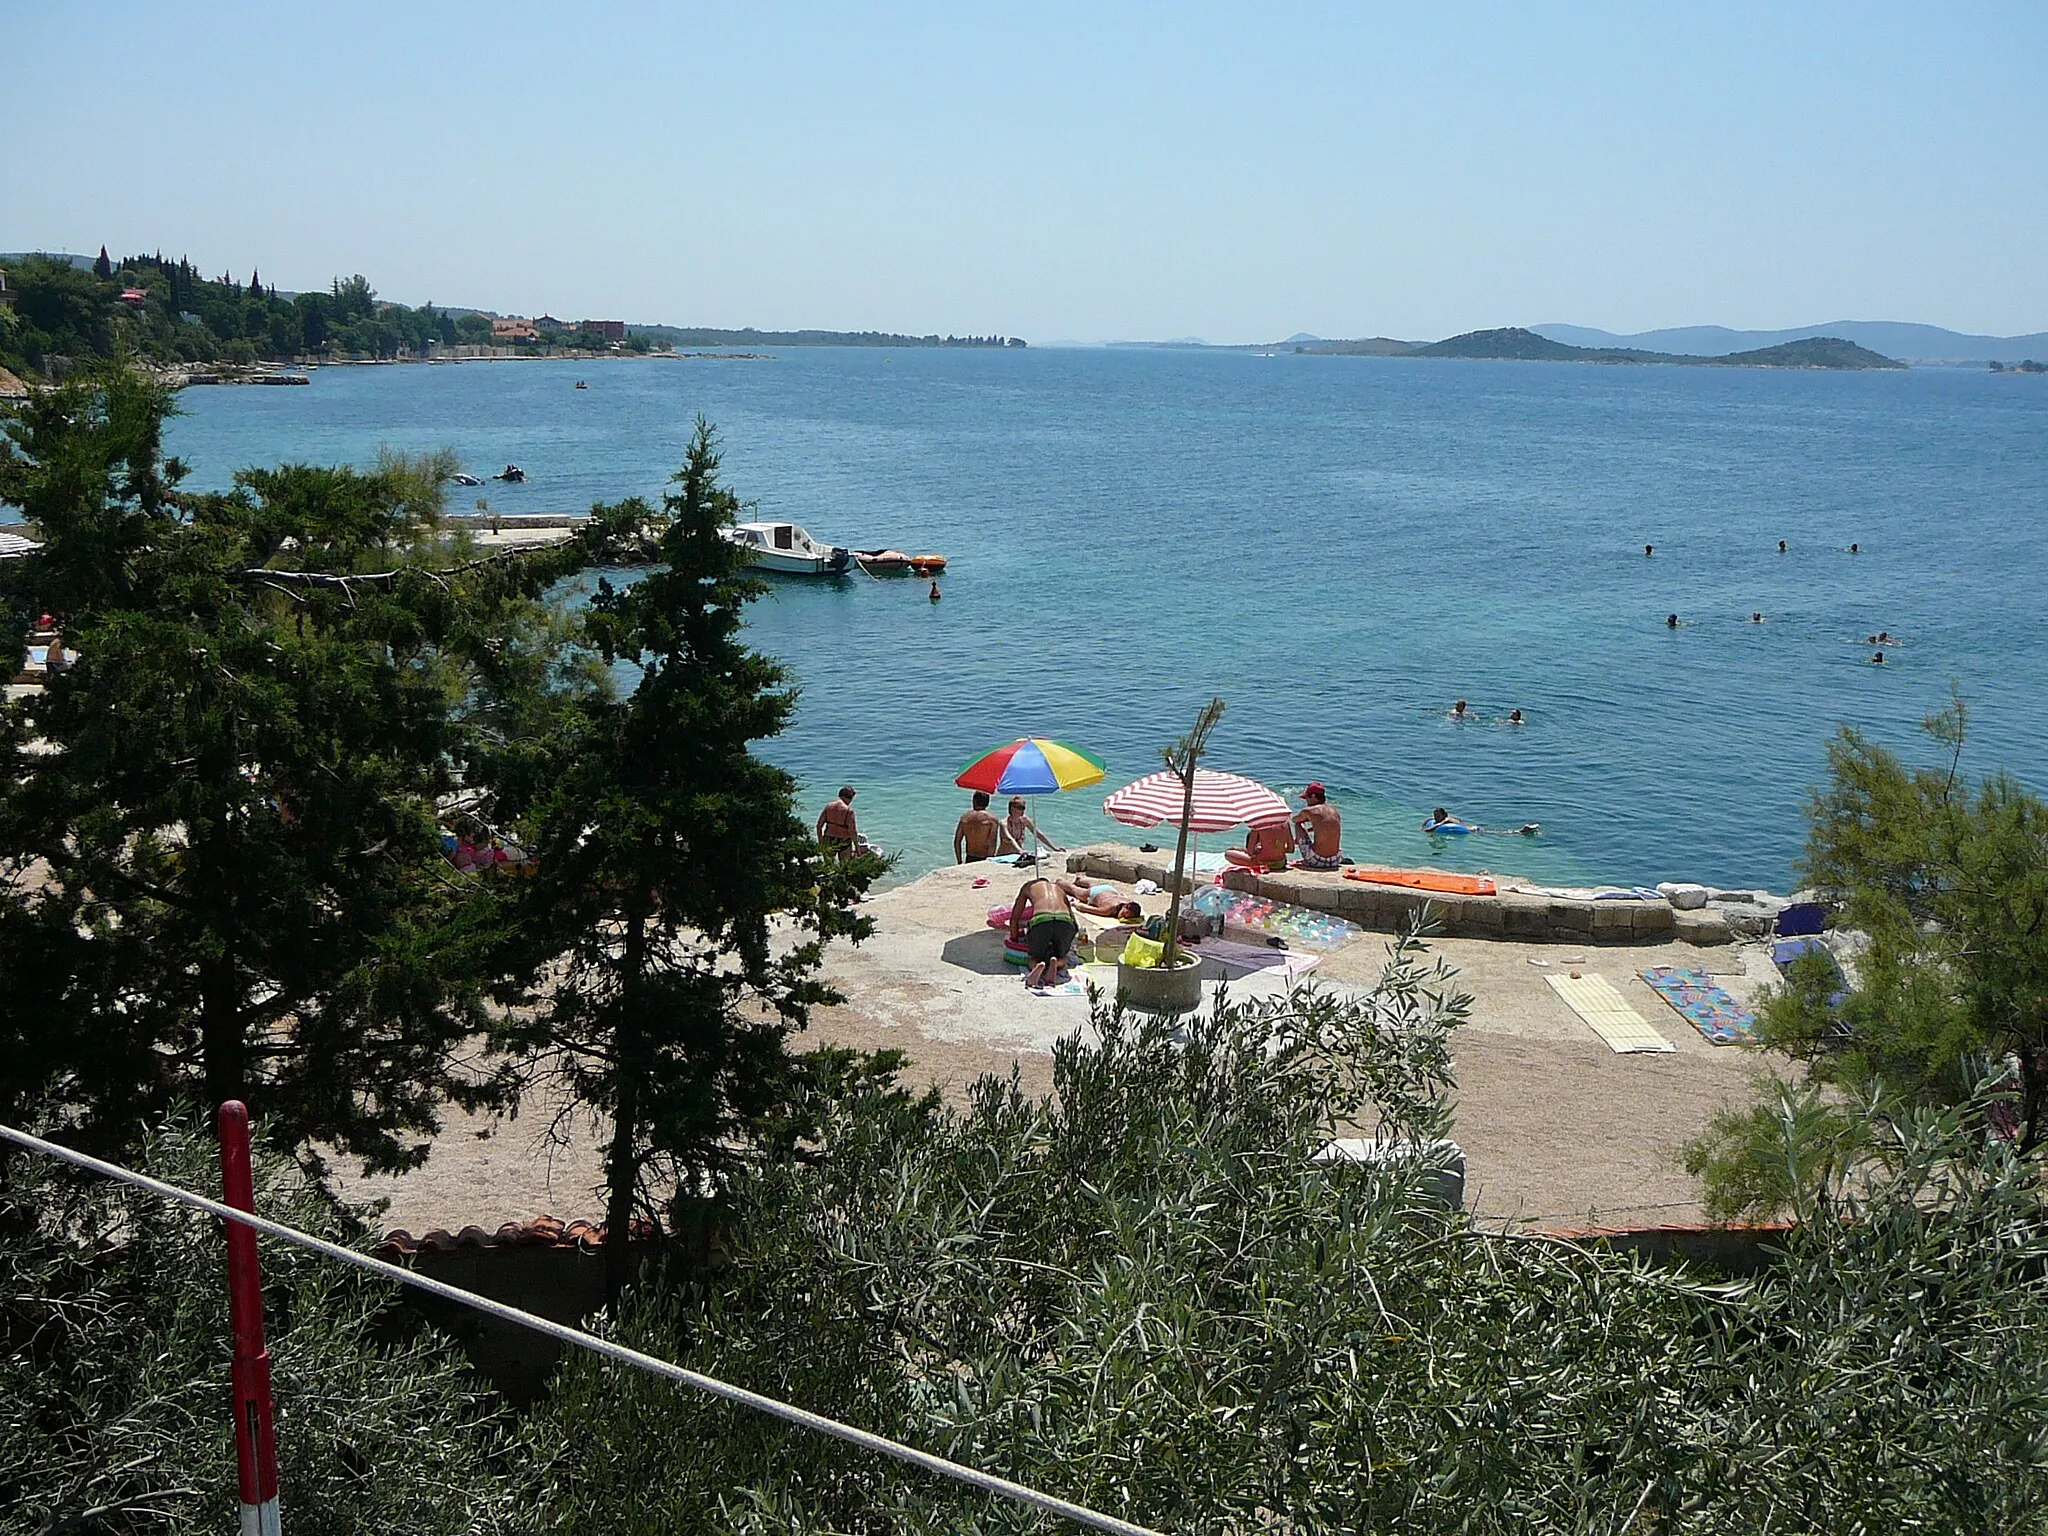 Photo showing: POHĽAD Z TERASY 2 - VIEW FROM THE TERRACE 2